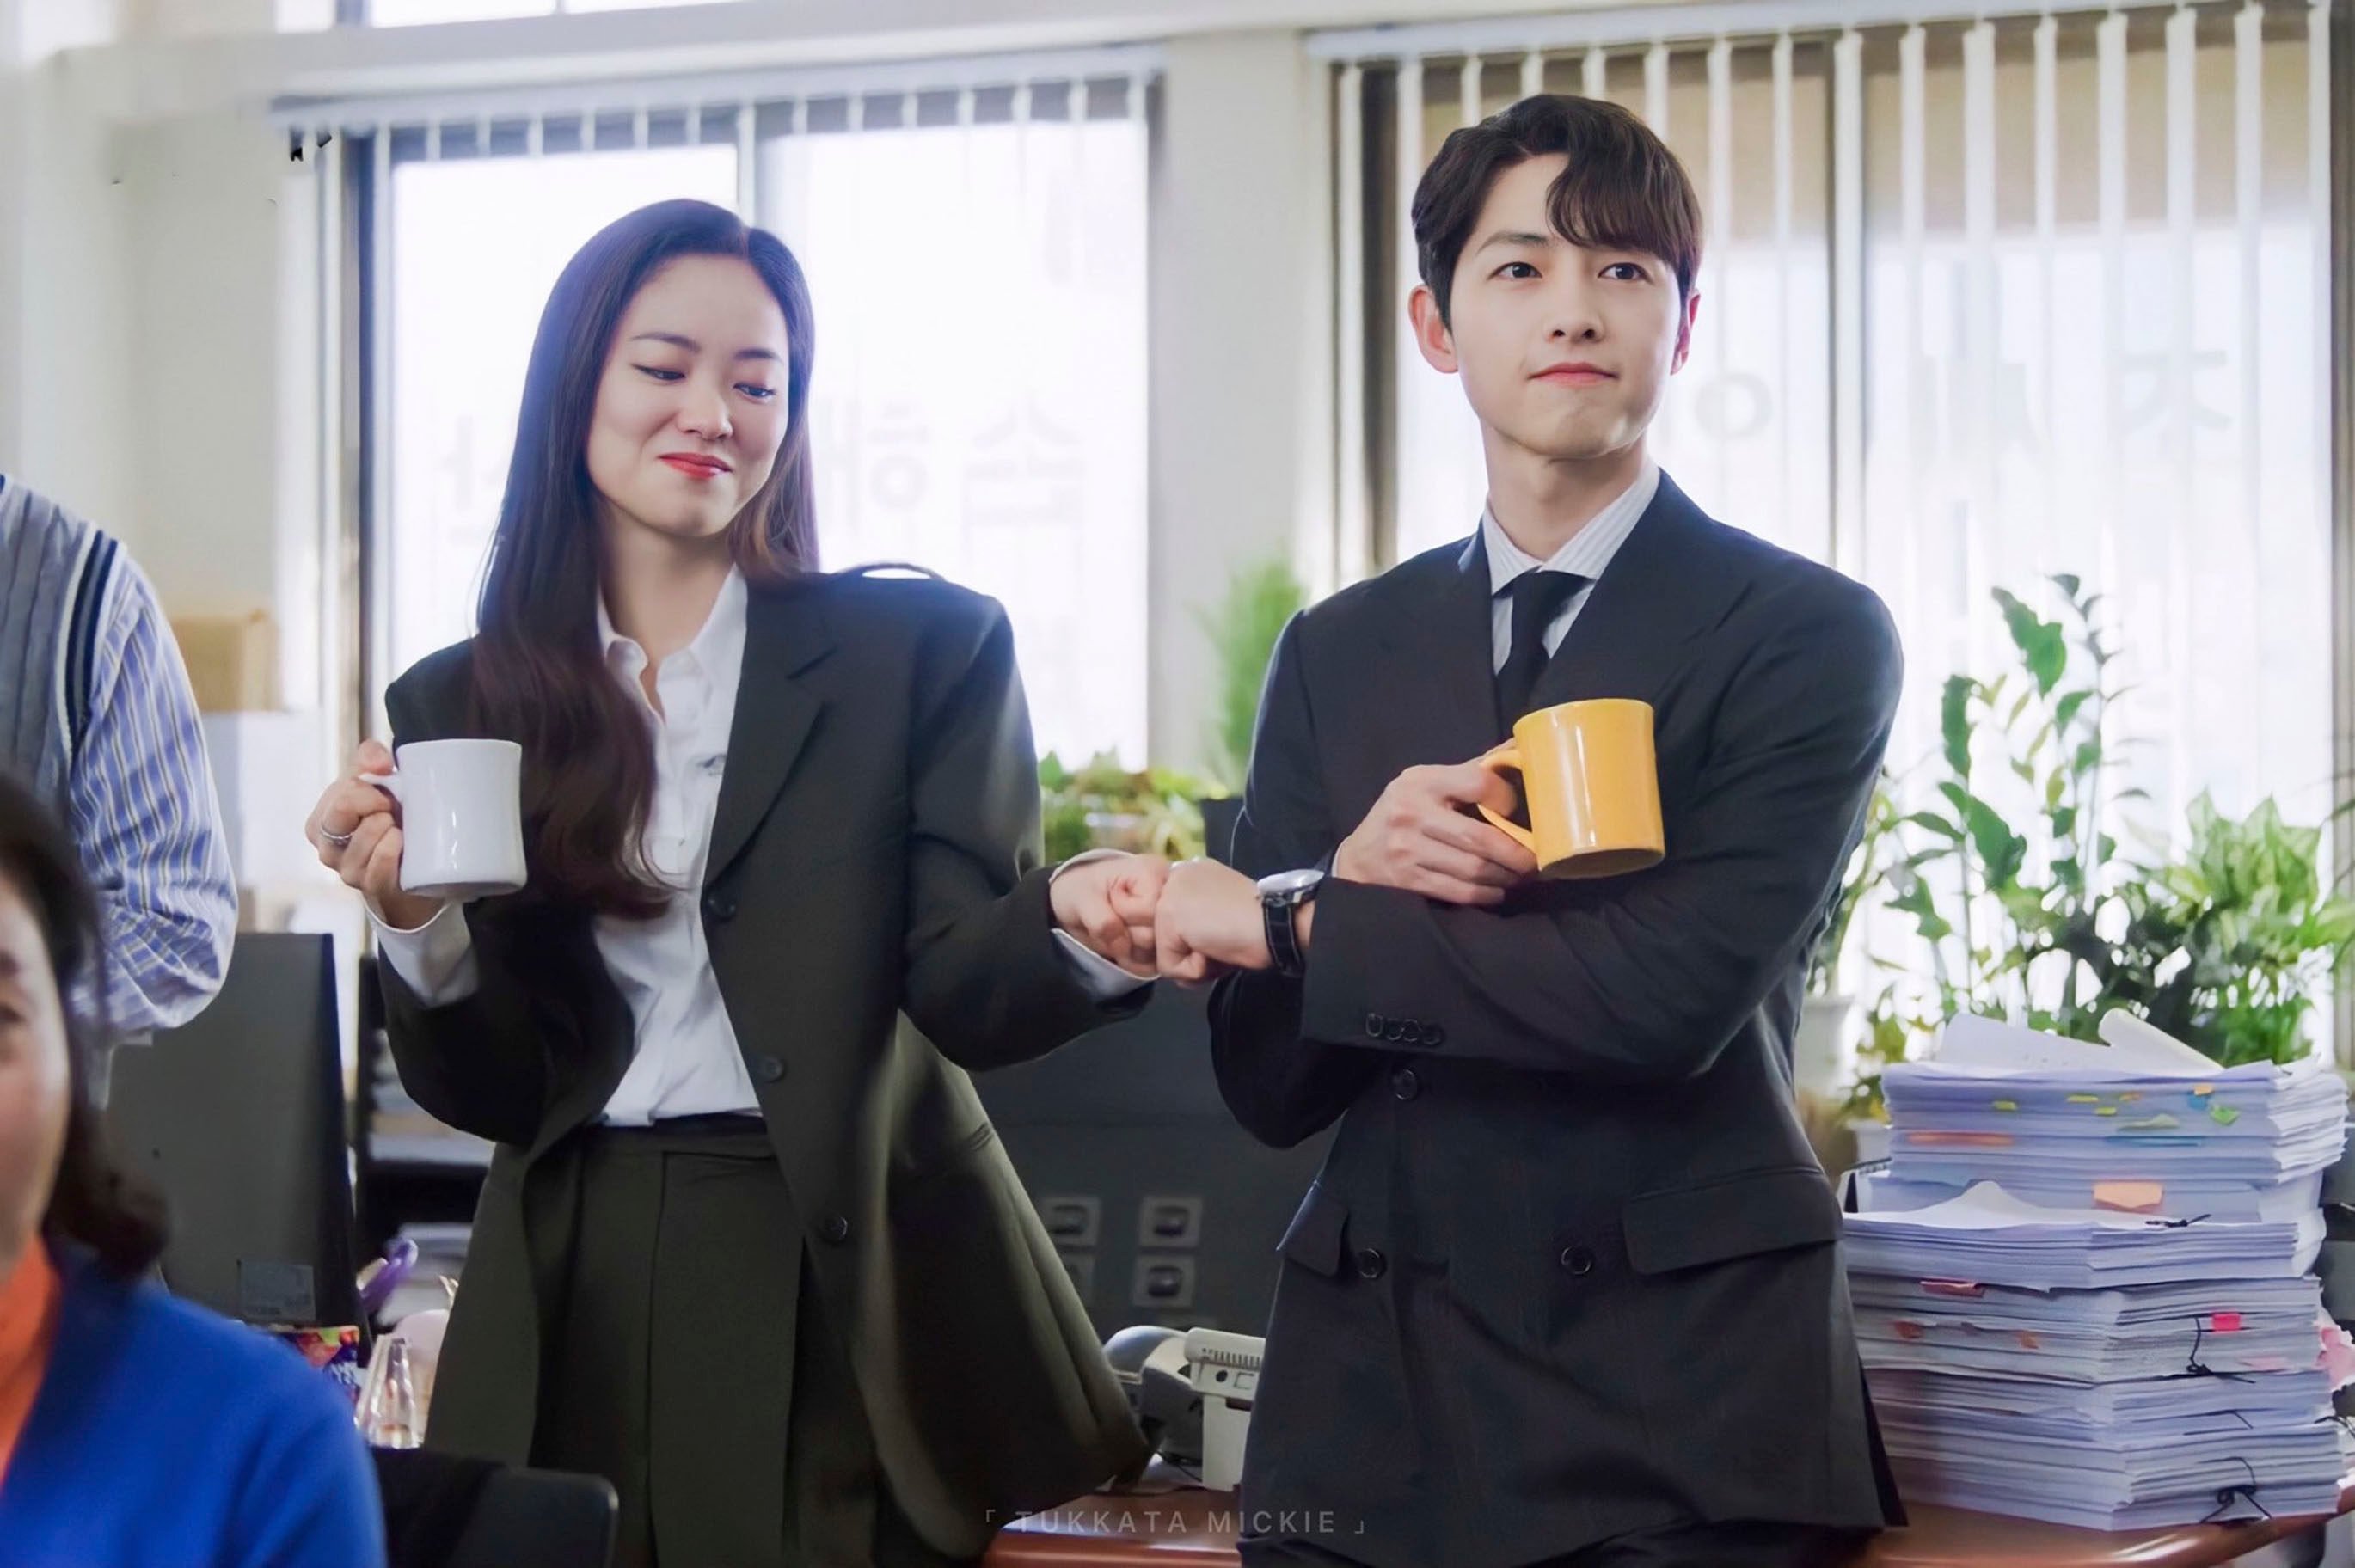 Song Joong-ki (right) and Jeon Yeo-been drink coffee in a still from K-drama series Vincenzo. Photo: courtesy of tvN